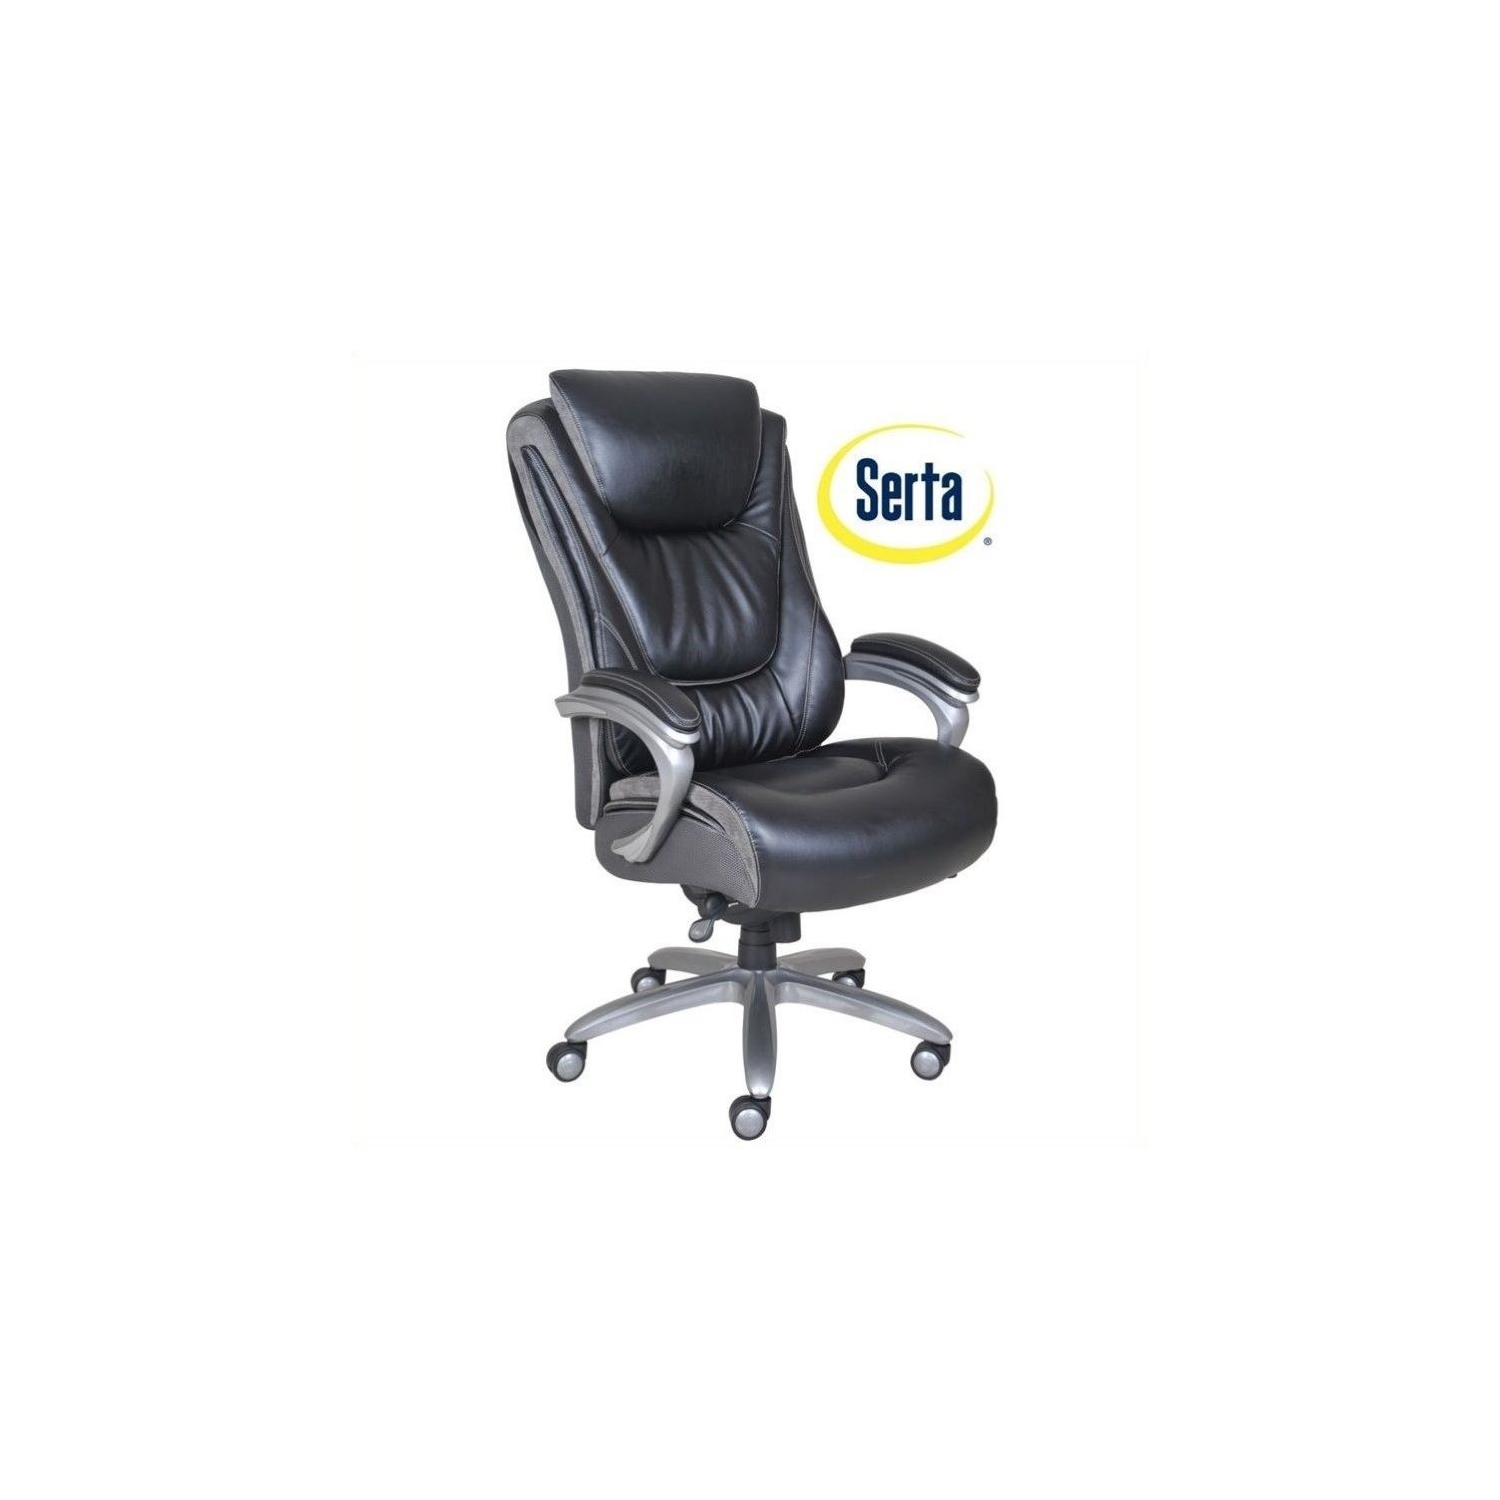 Serta Baxter Big and Tall Smart Layers Executive Office Chair Black and Gray